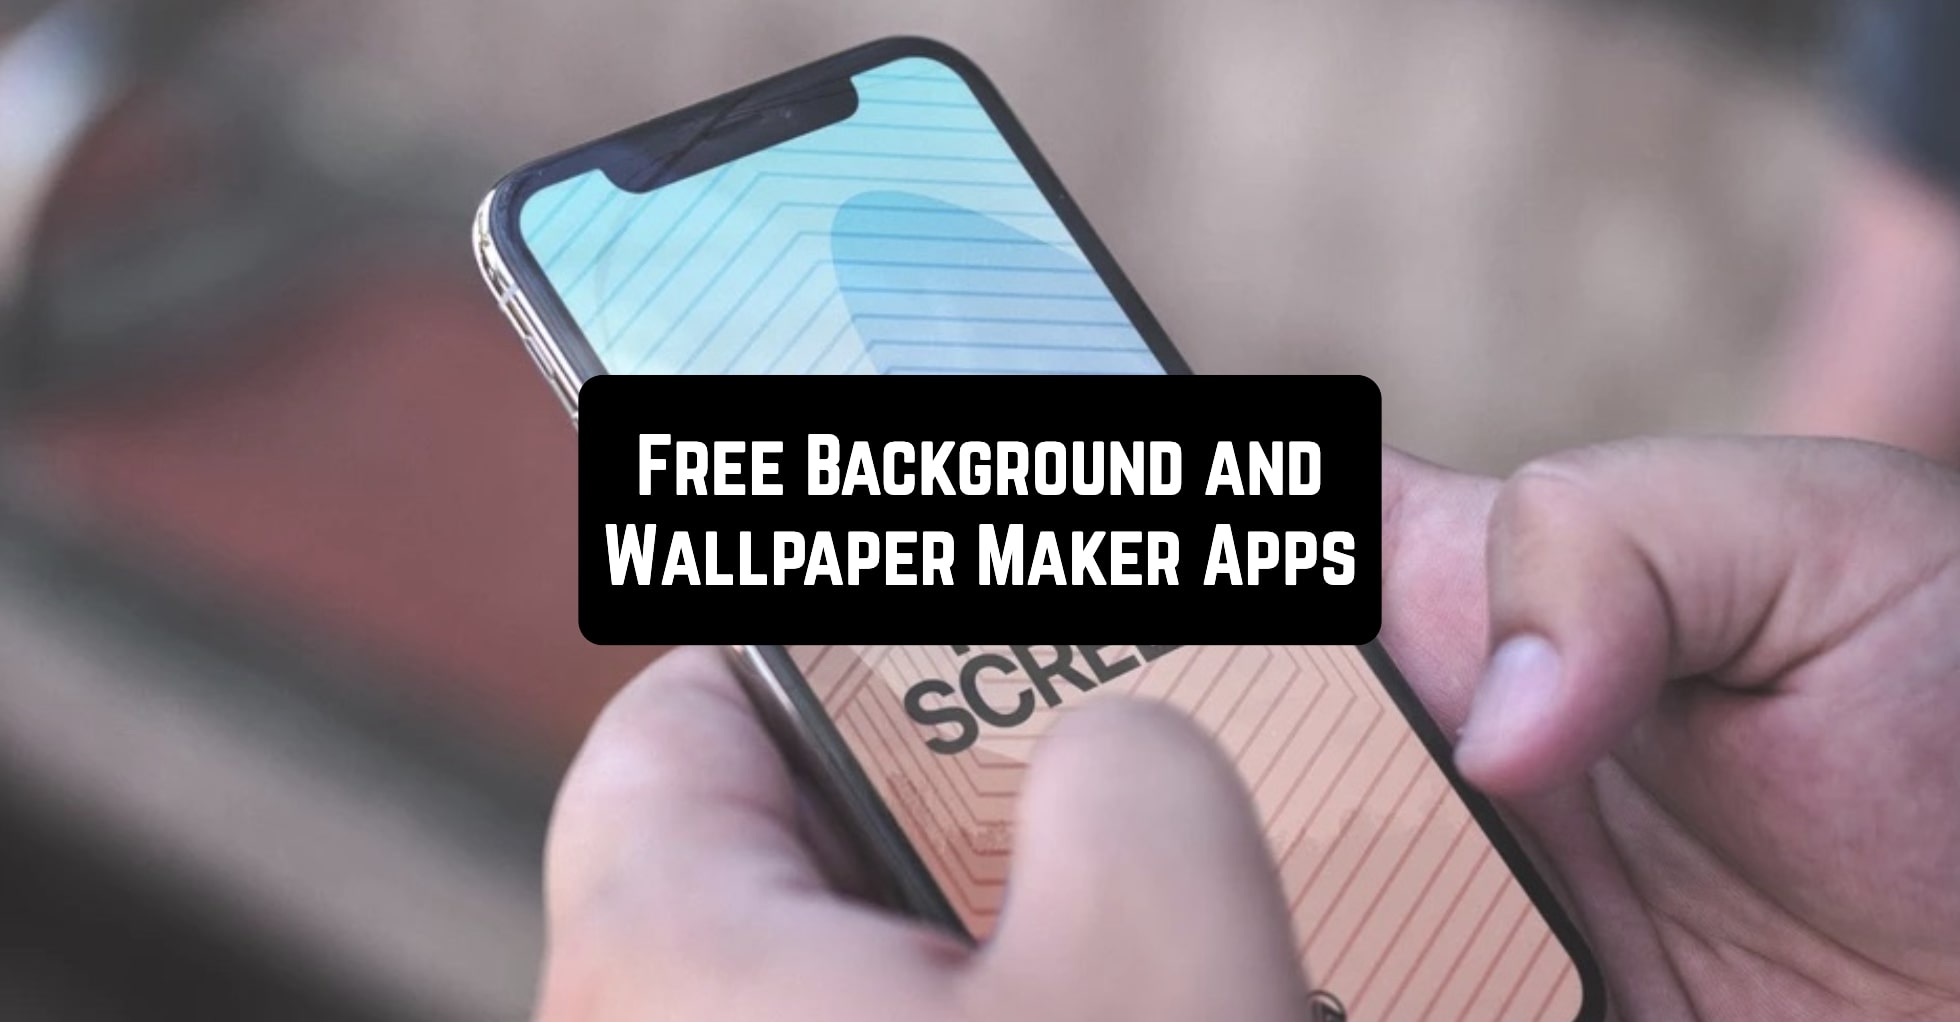 Free Background and Wallpaper Maker Apps